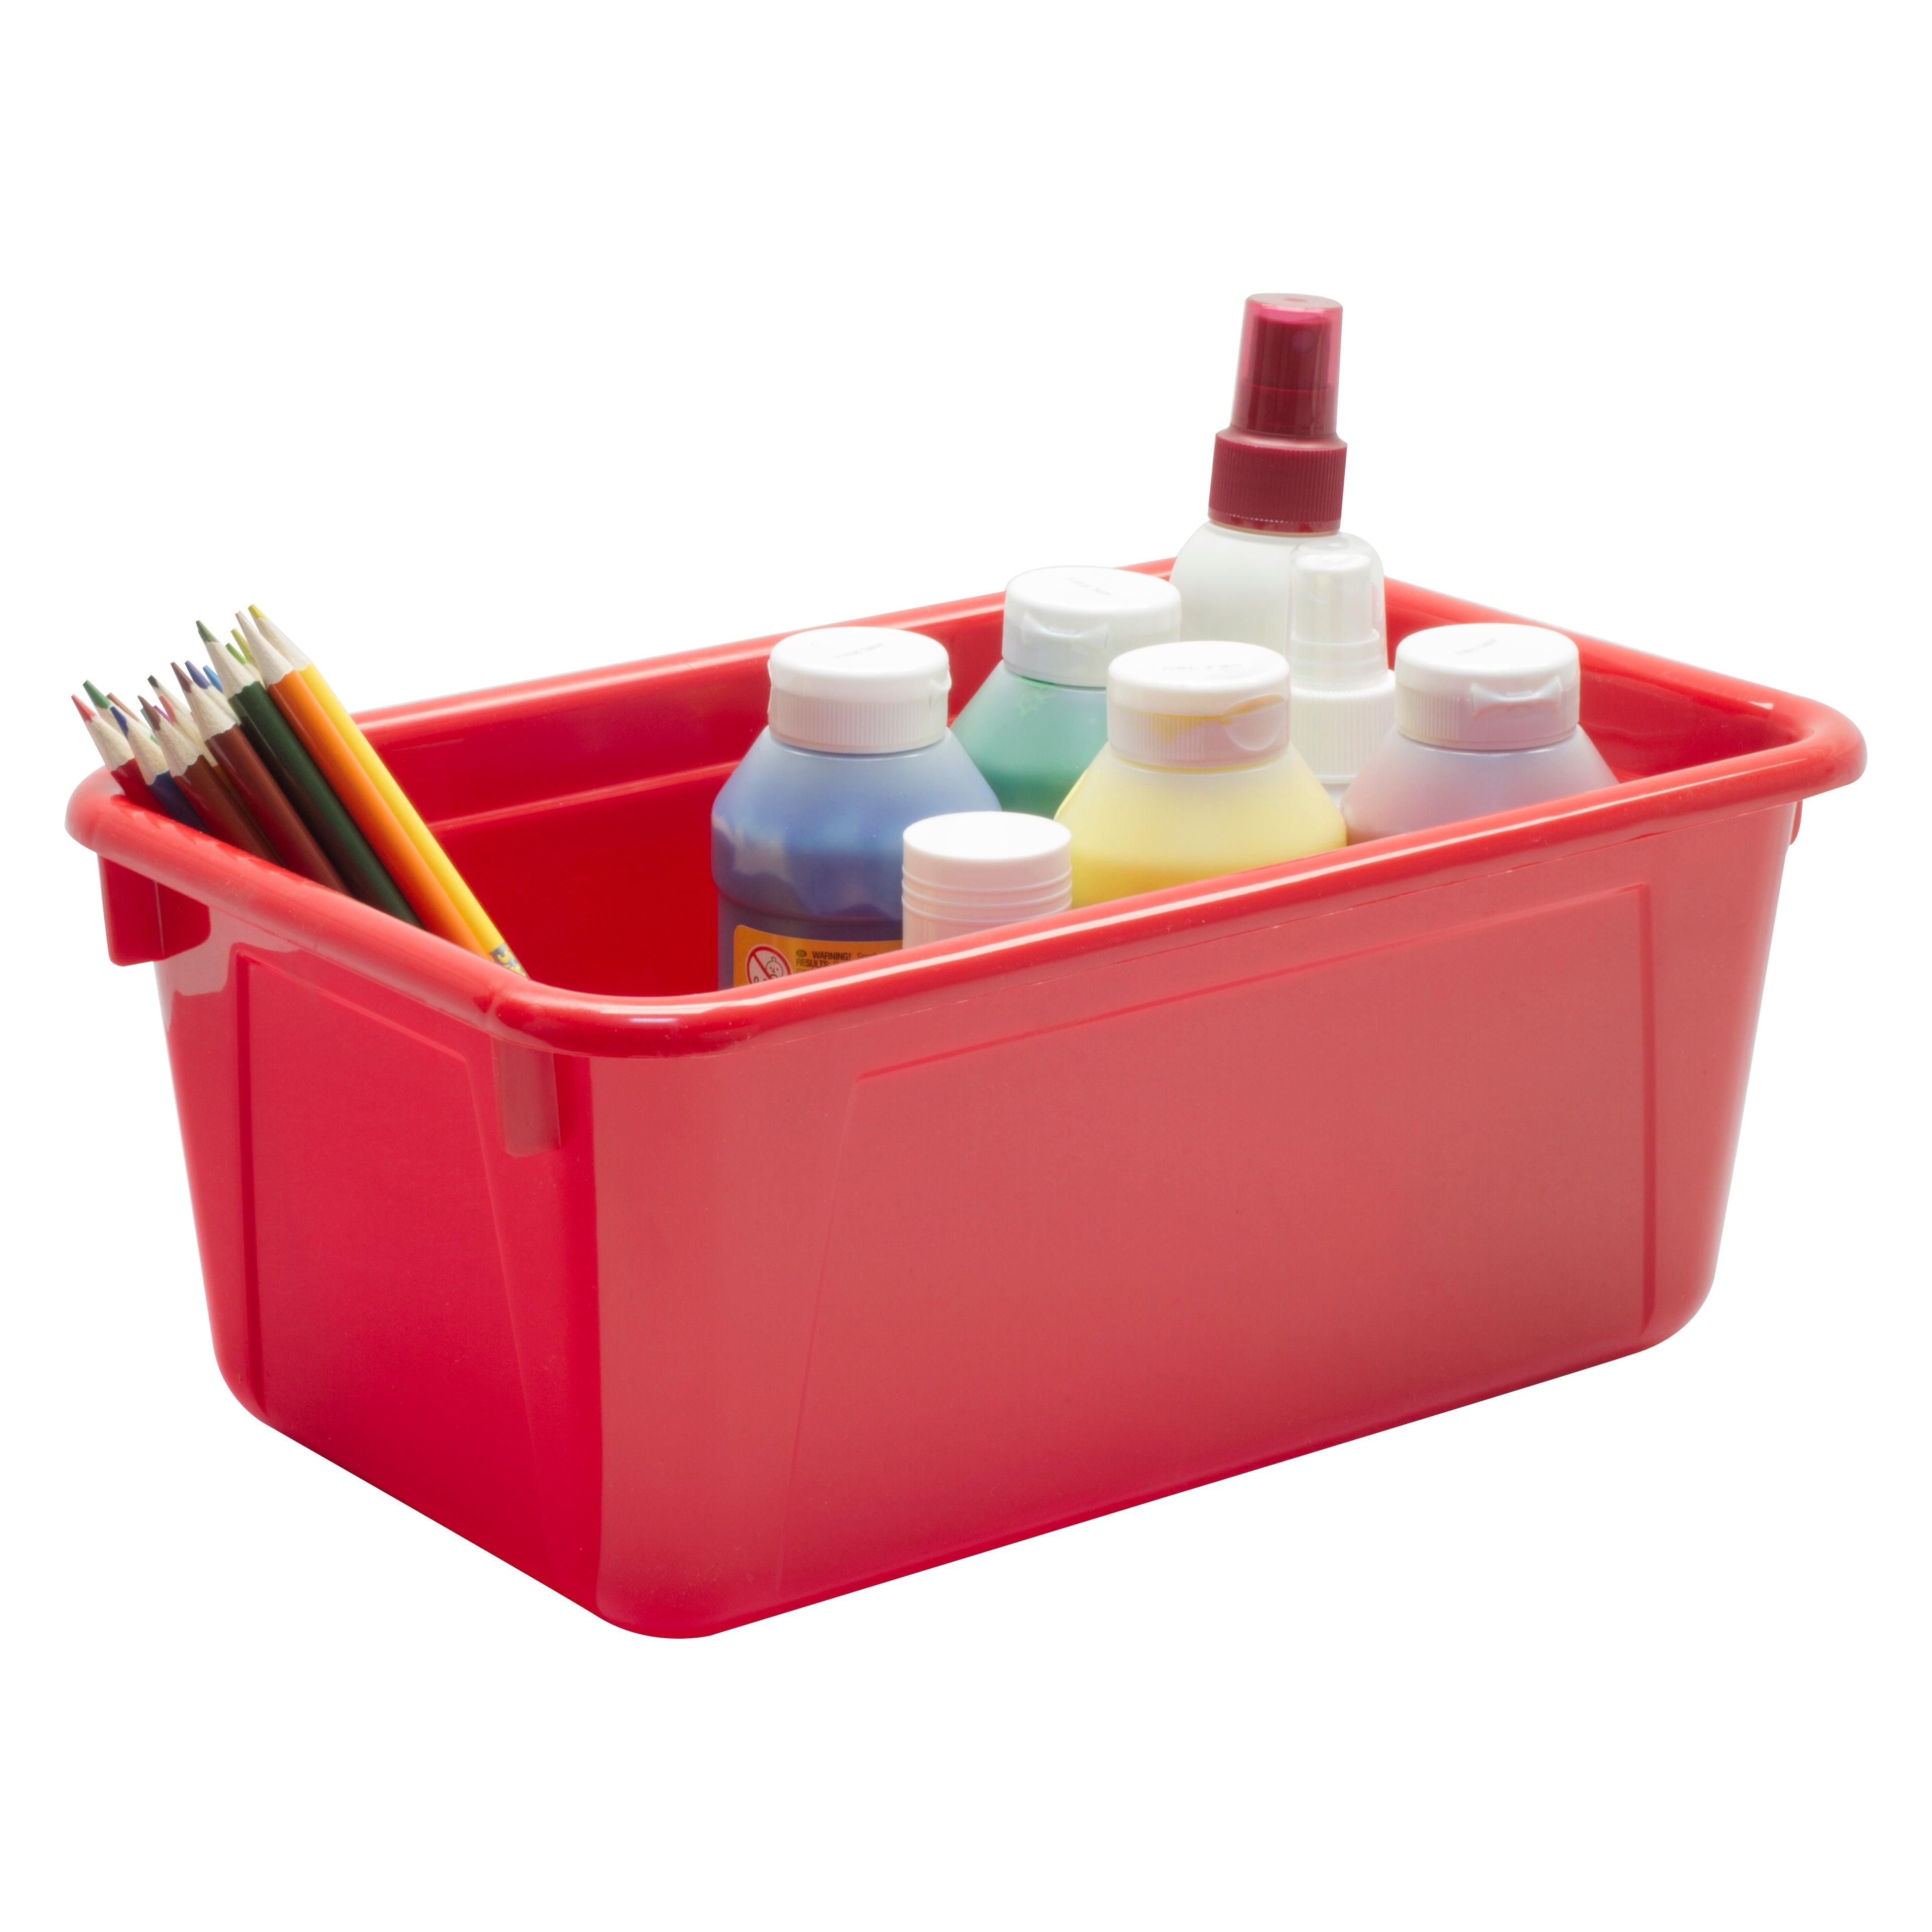 Storex Small Storage Bins, 13.625 x 11.25 x 7.87 Inches, Assorted Colors,  Color Assortment Will Vary, Case of 6 (61514U06C)